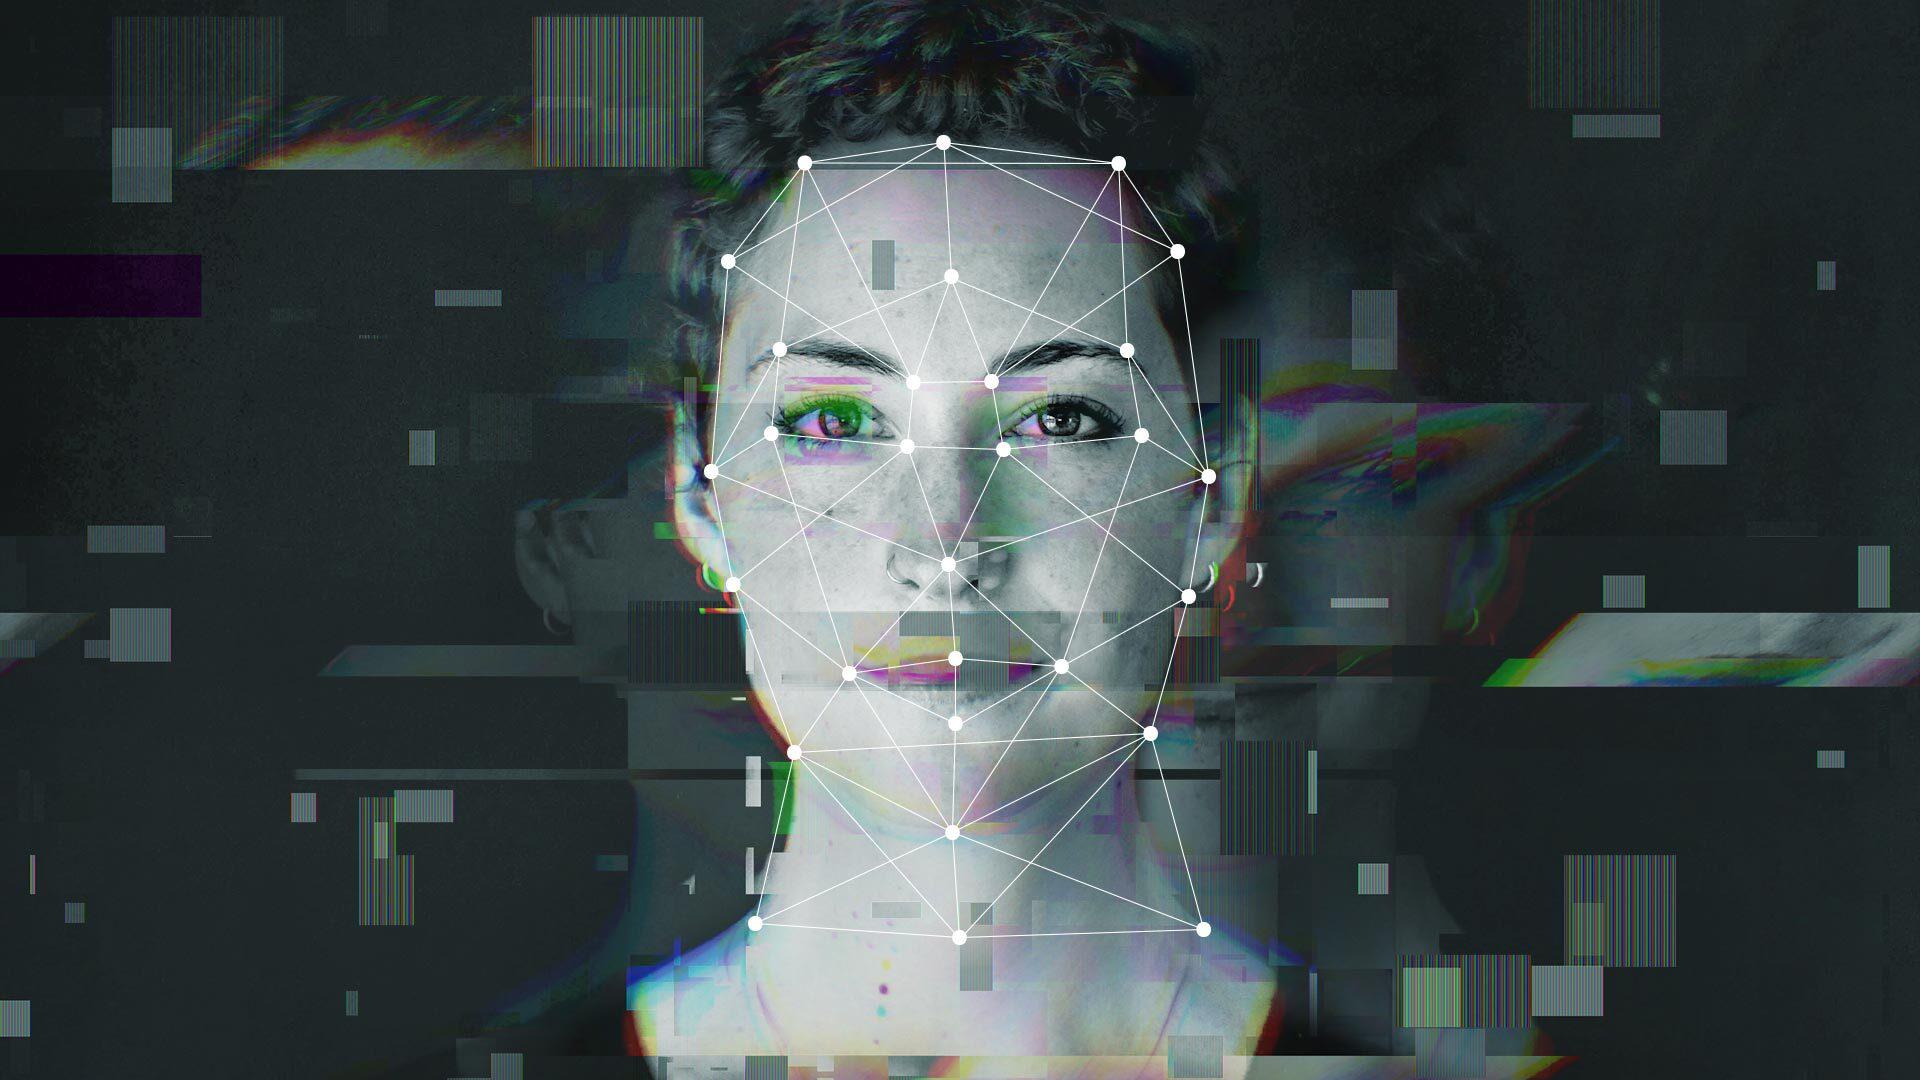 photo illustration of women's face overlain by computer imagery that evokes AI processing